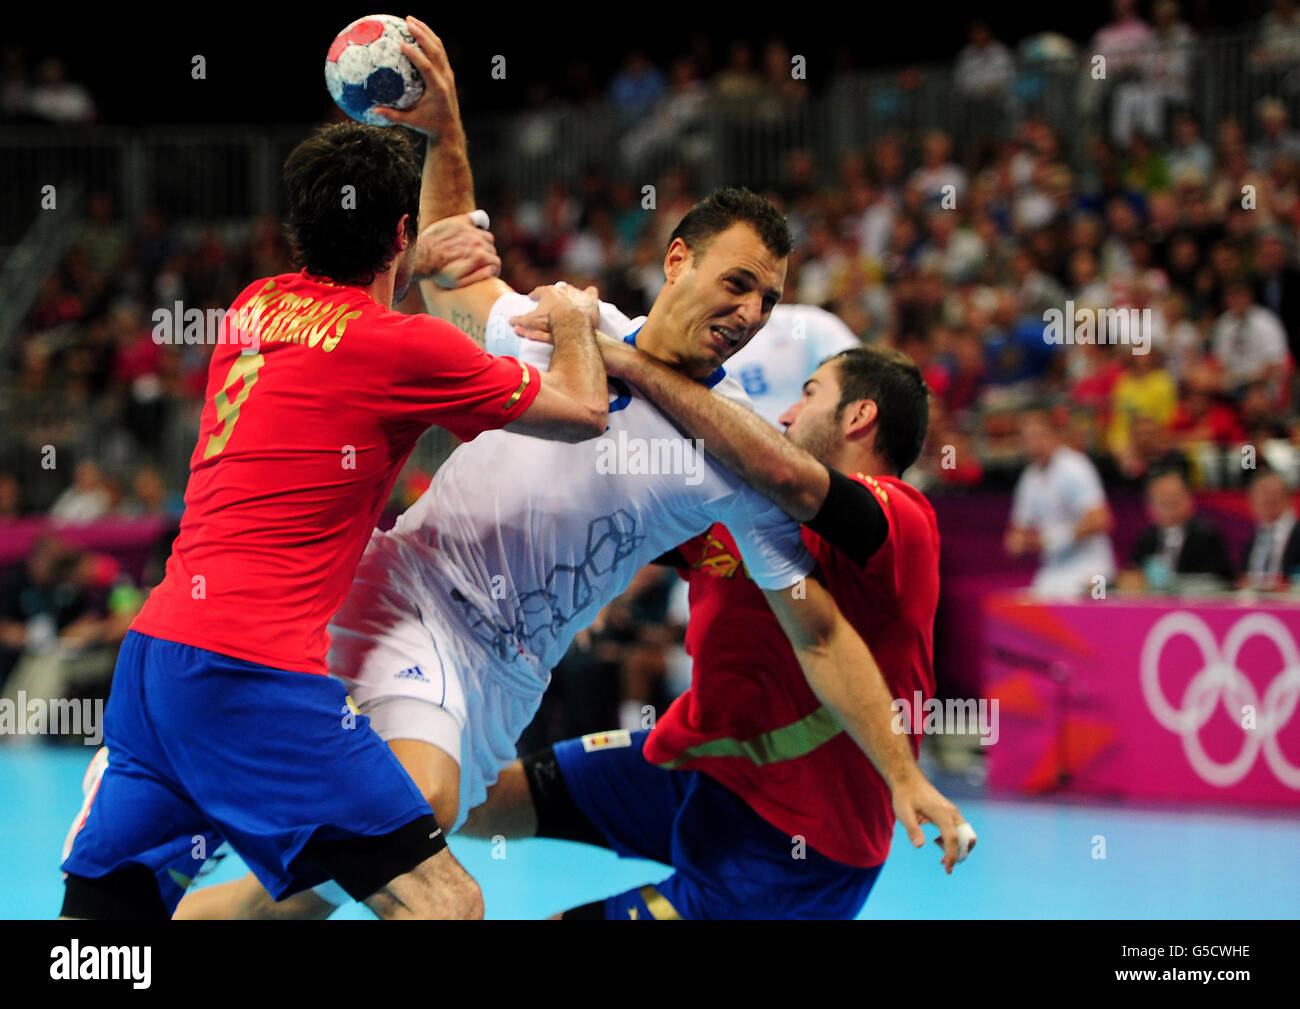 France's Jerome Fernandez (centre) is tackled by Spain's Raul Rodriguez Entrerrios during the Handball Men's Quarterfinal match at the Basketball Arena, Olympic Park. Stock Photo